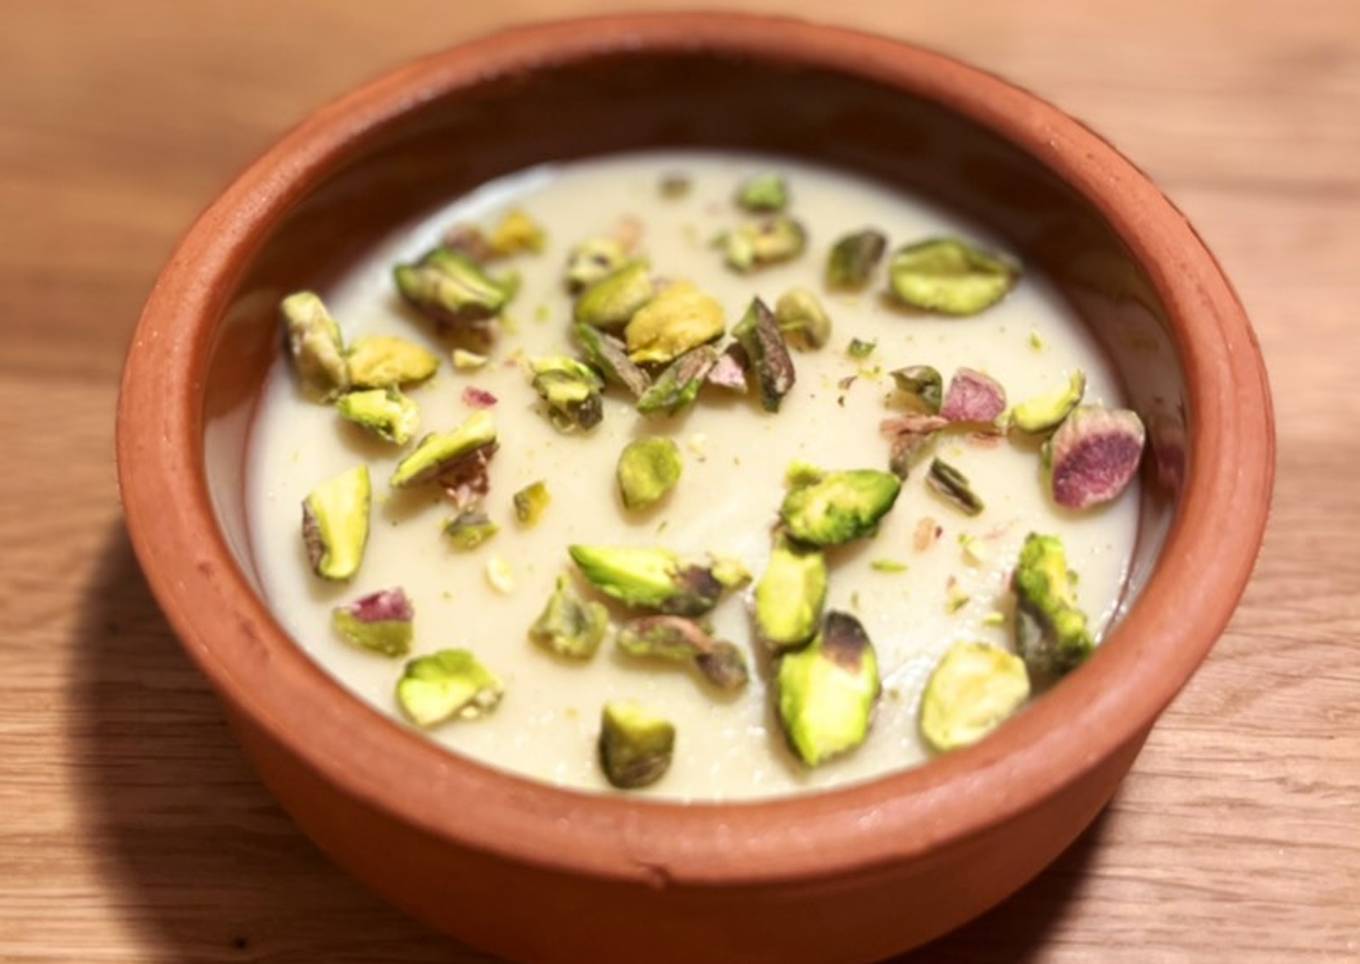 Mouhalabiyeh - Middle eastern milk pudding with cardamom and saffron (vegan)